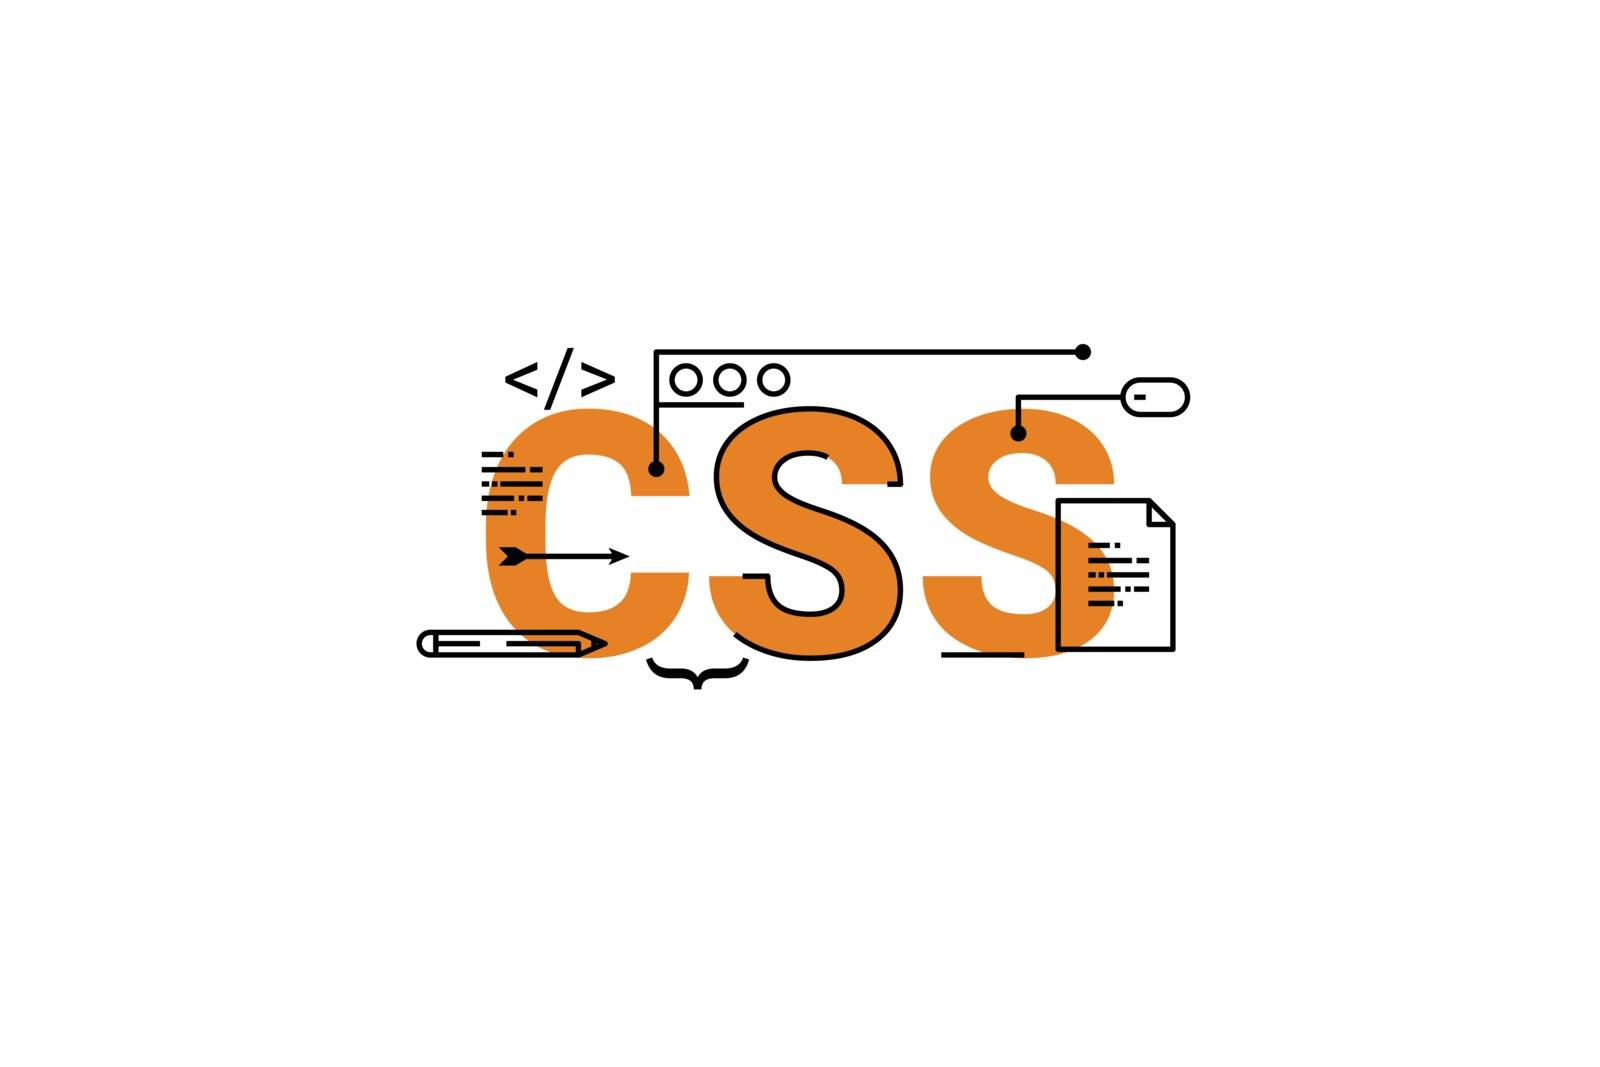 CSS word lettering typography design illustration with line icons and ornaments in orange theme